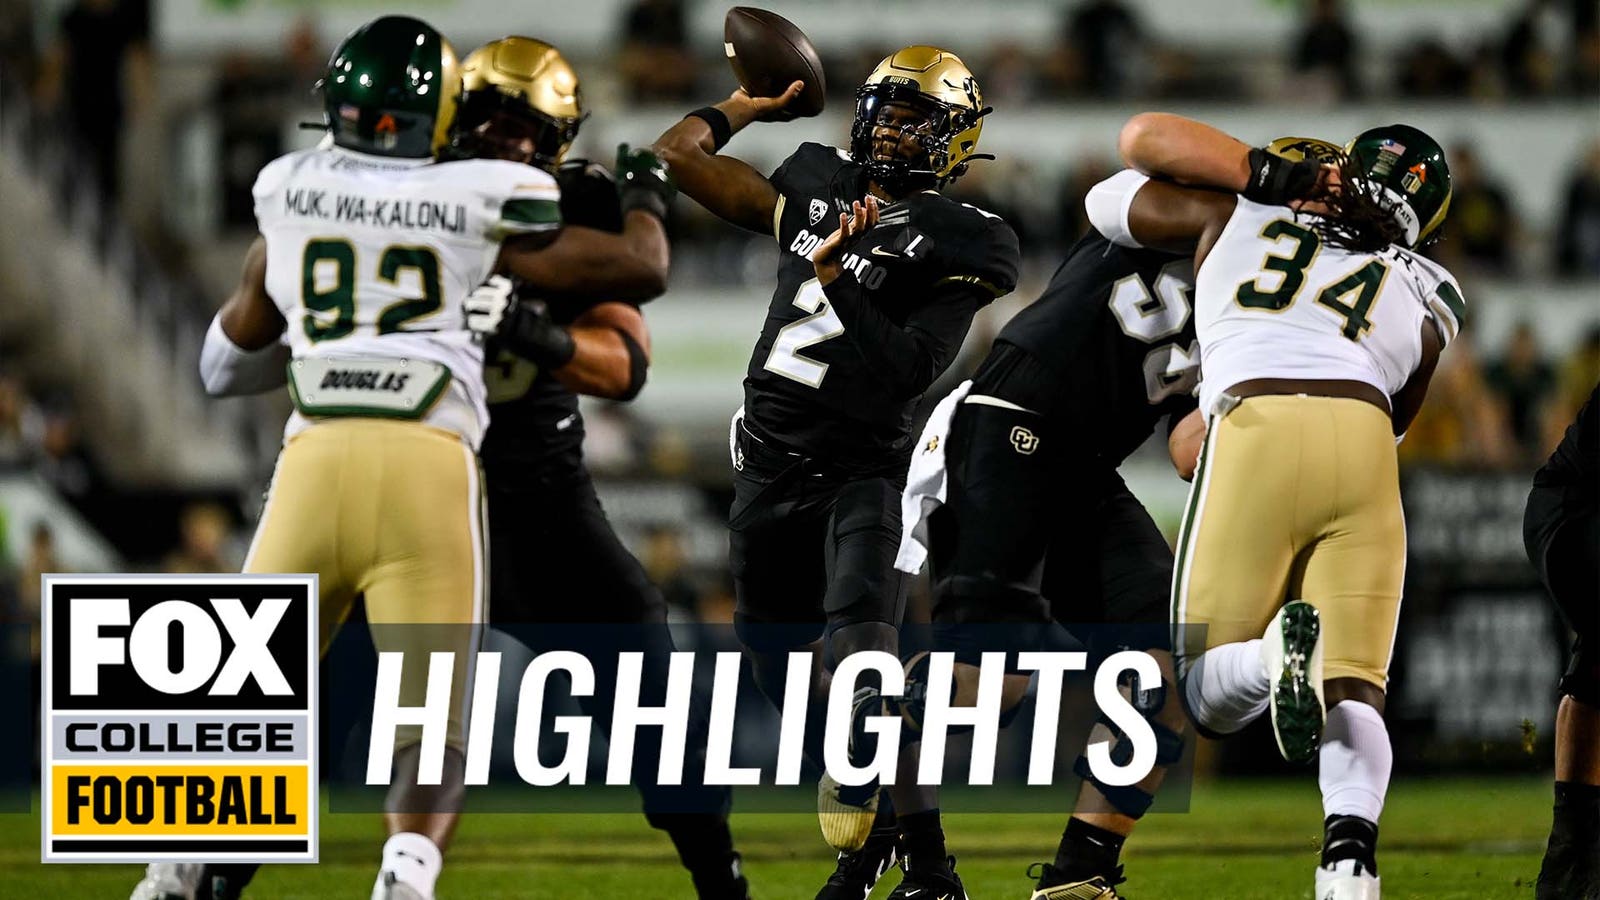 Watch all the big plays from Colorado's thrilling victory